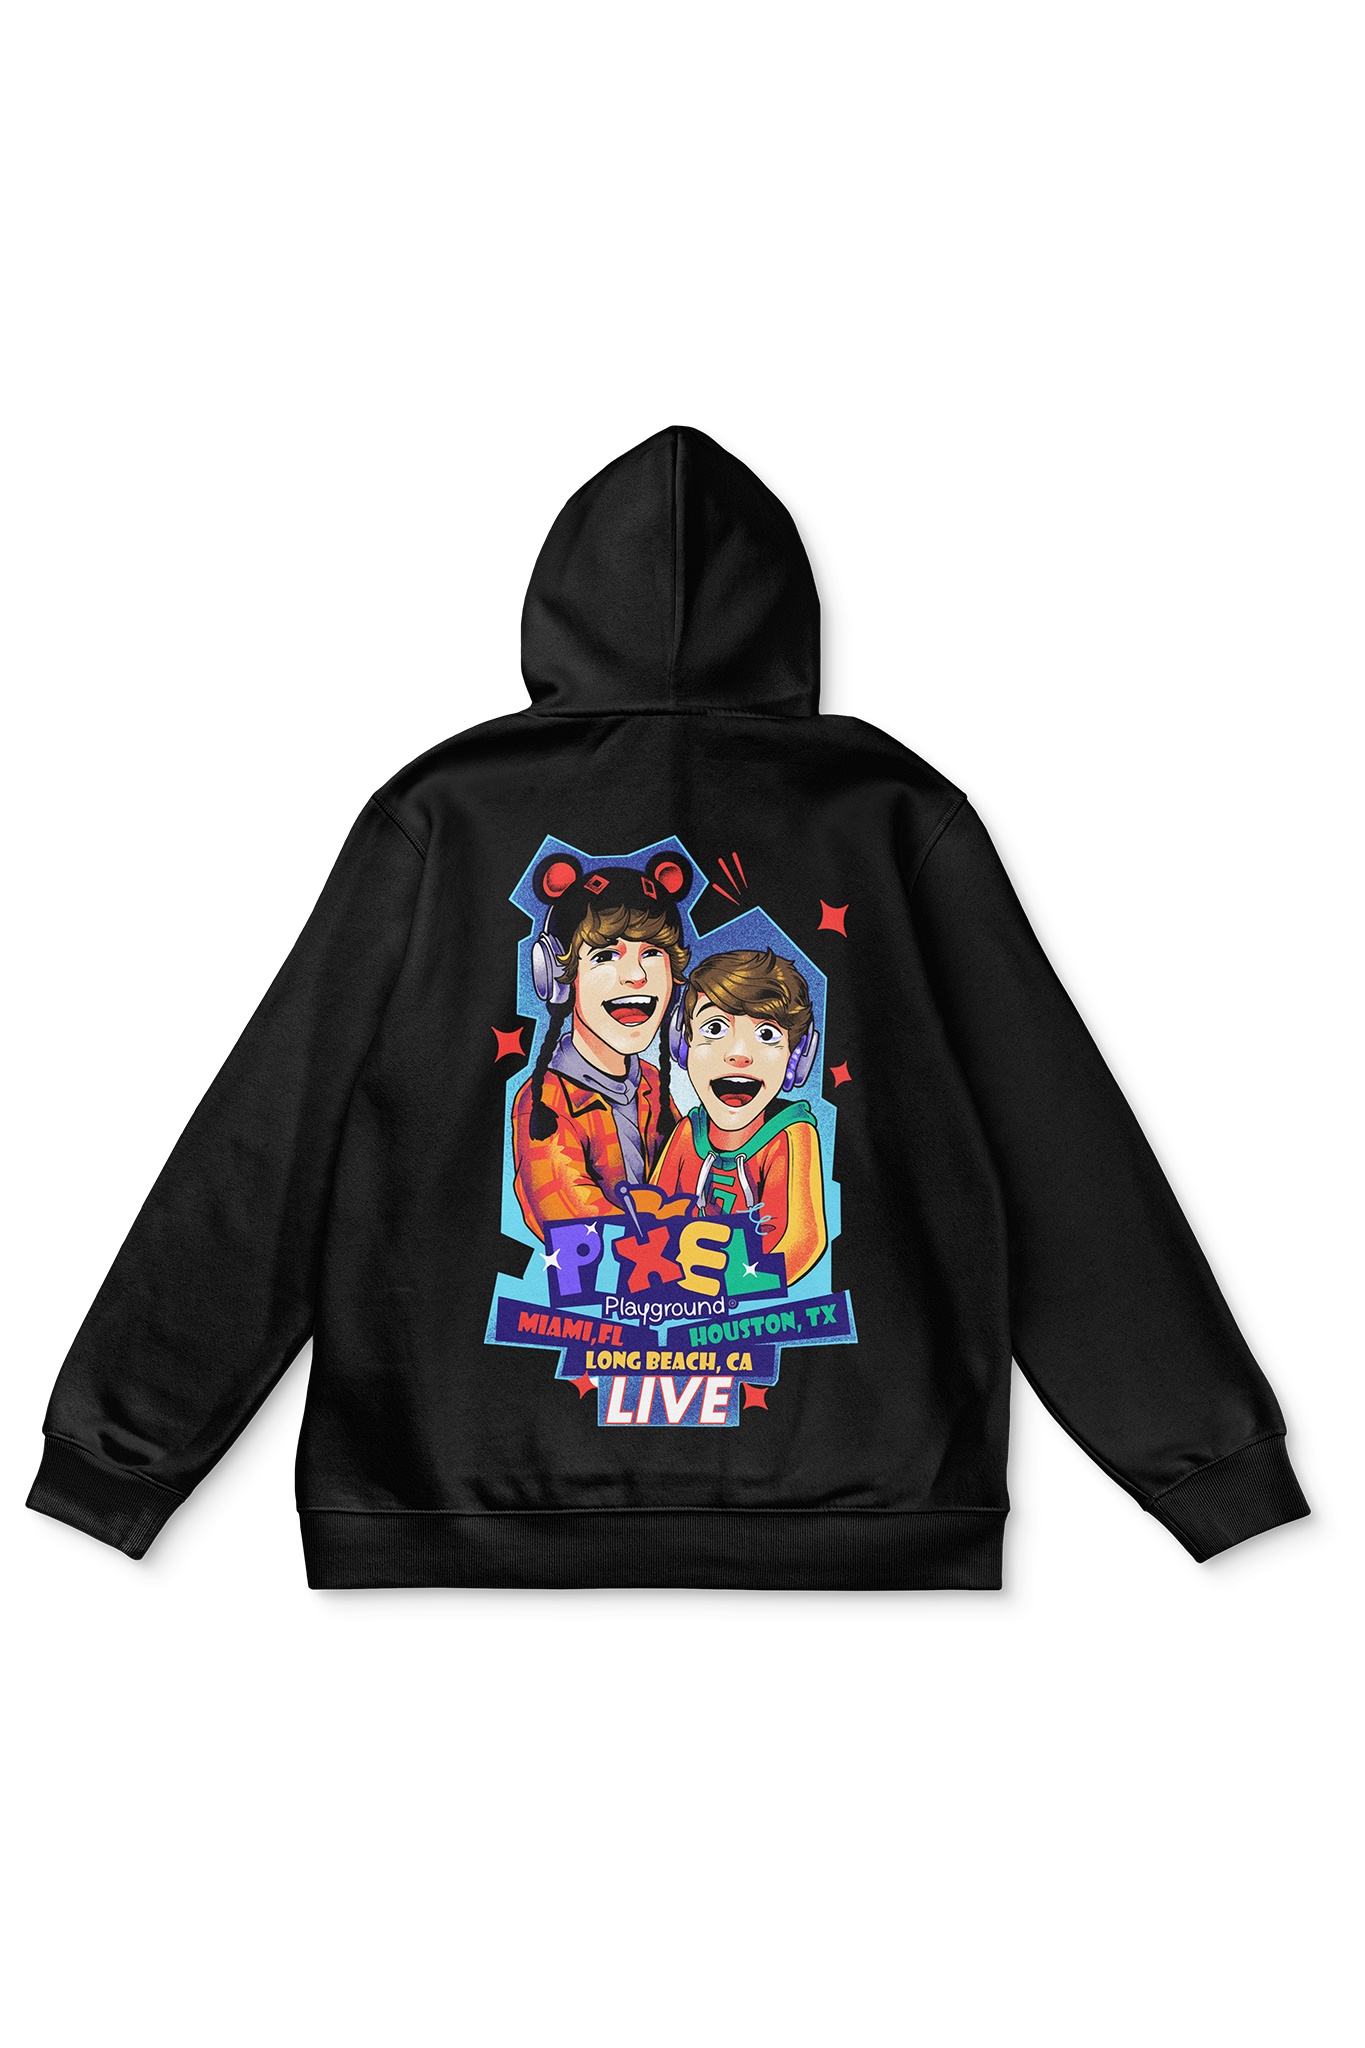 Black hoodie with the Pixel Playground print across the entire back.